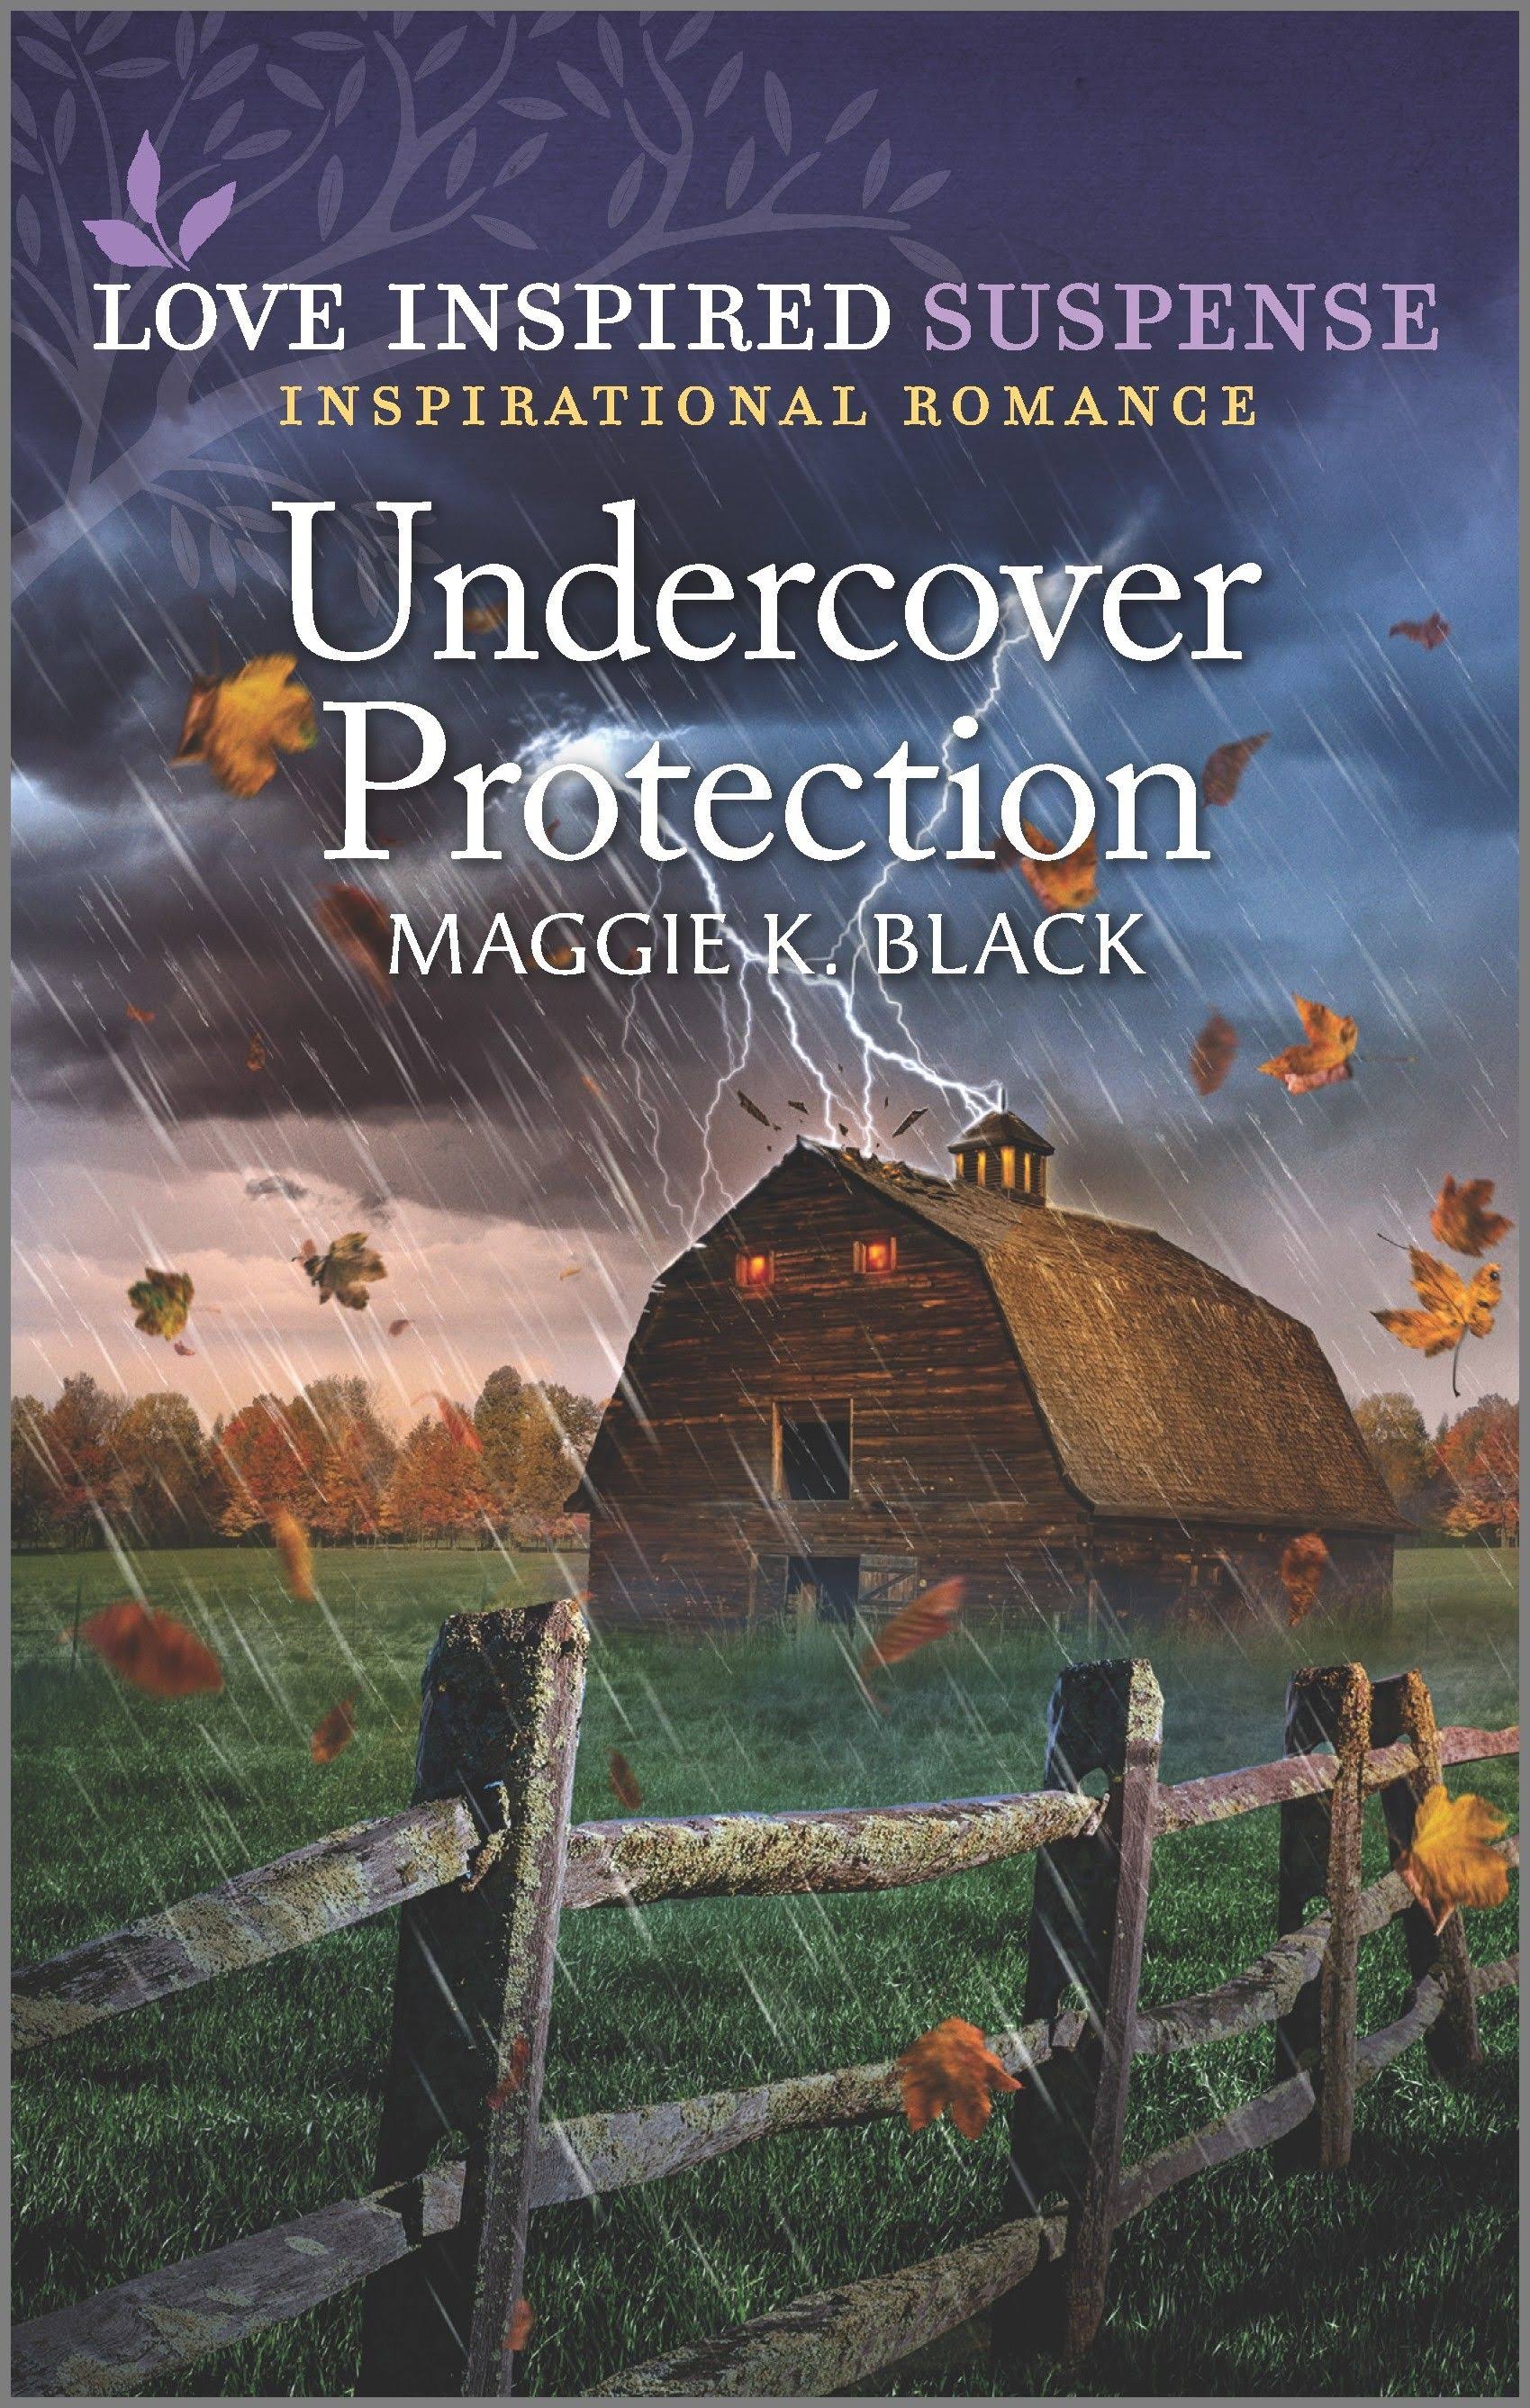 Undercover Protection by Maggie K Black